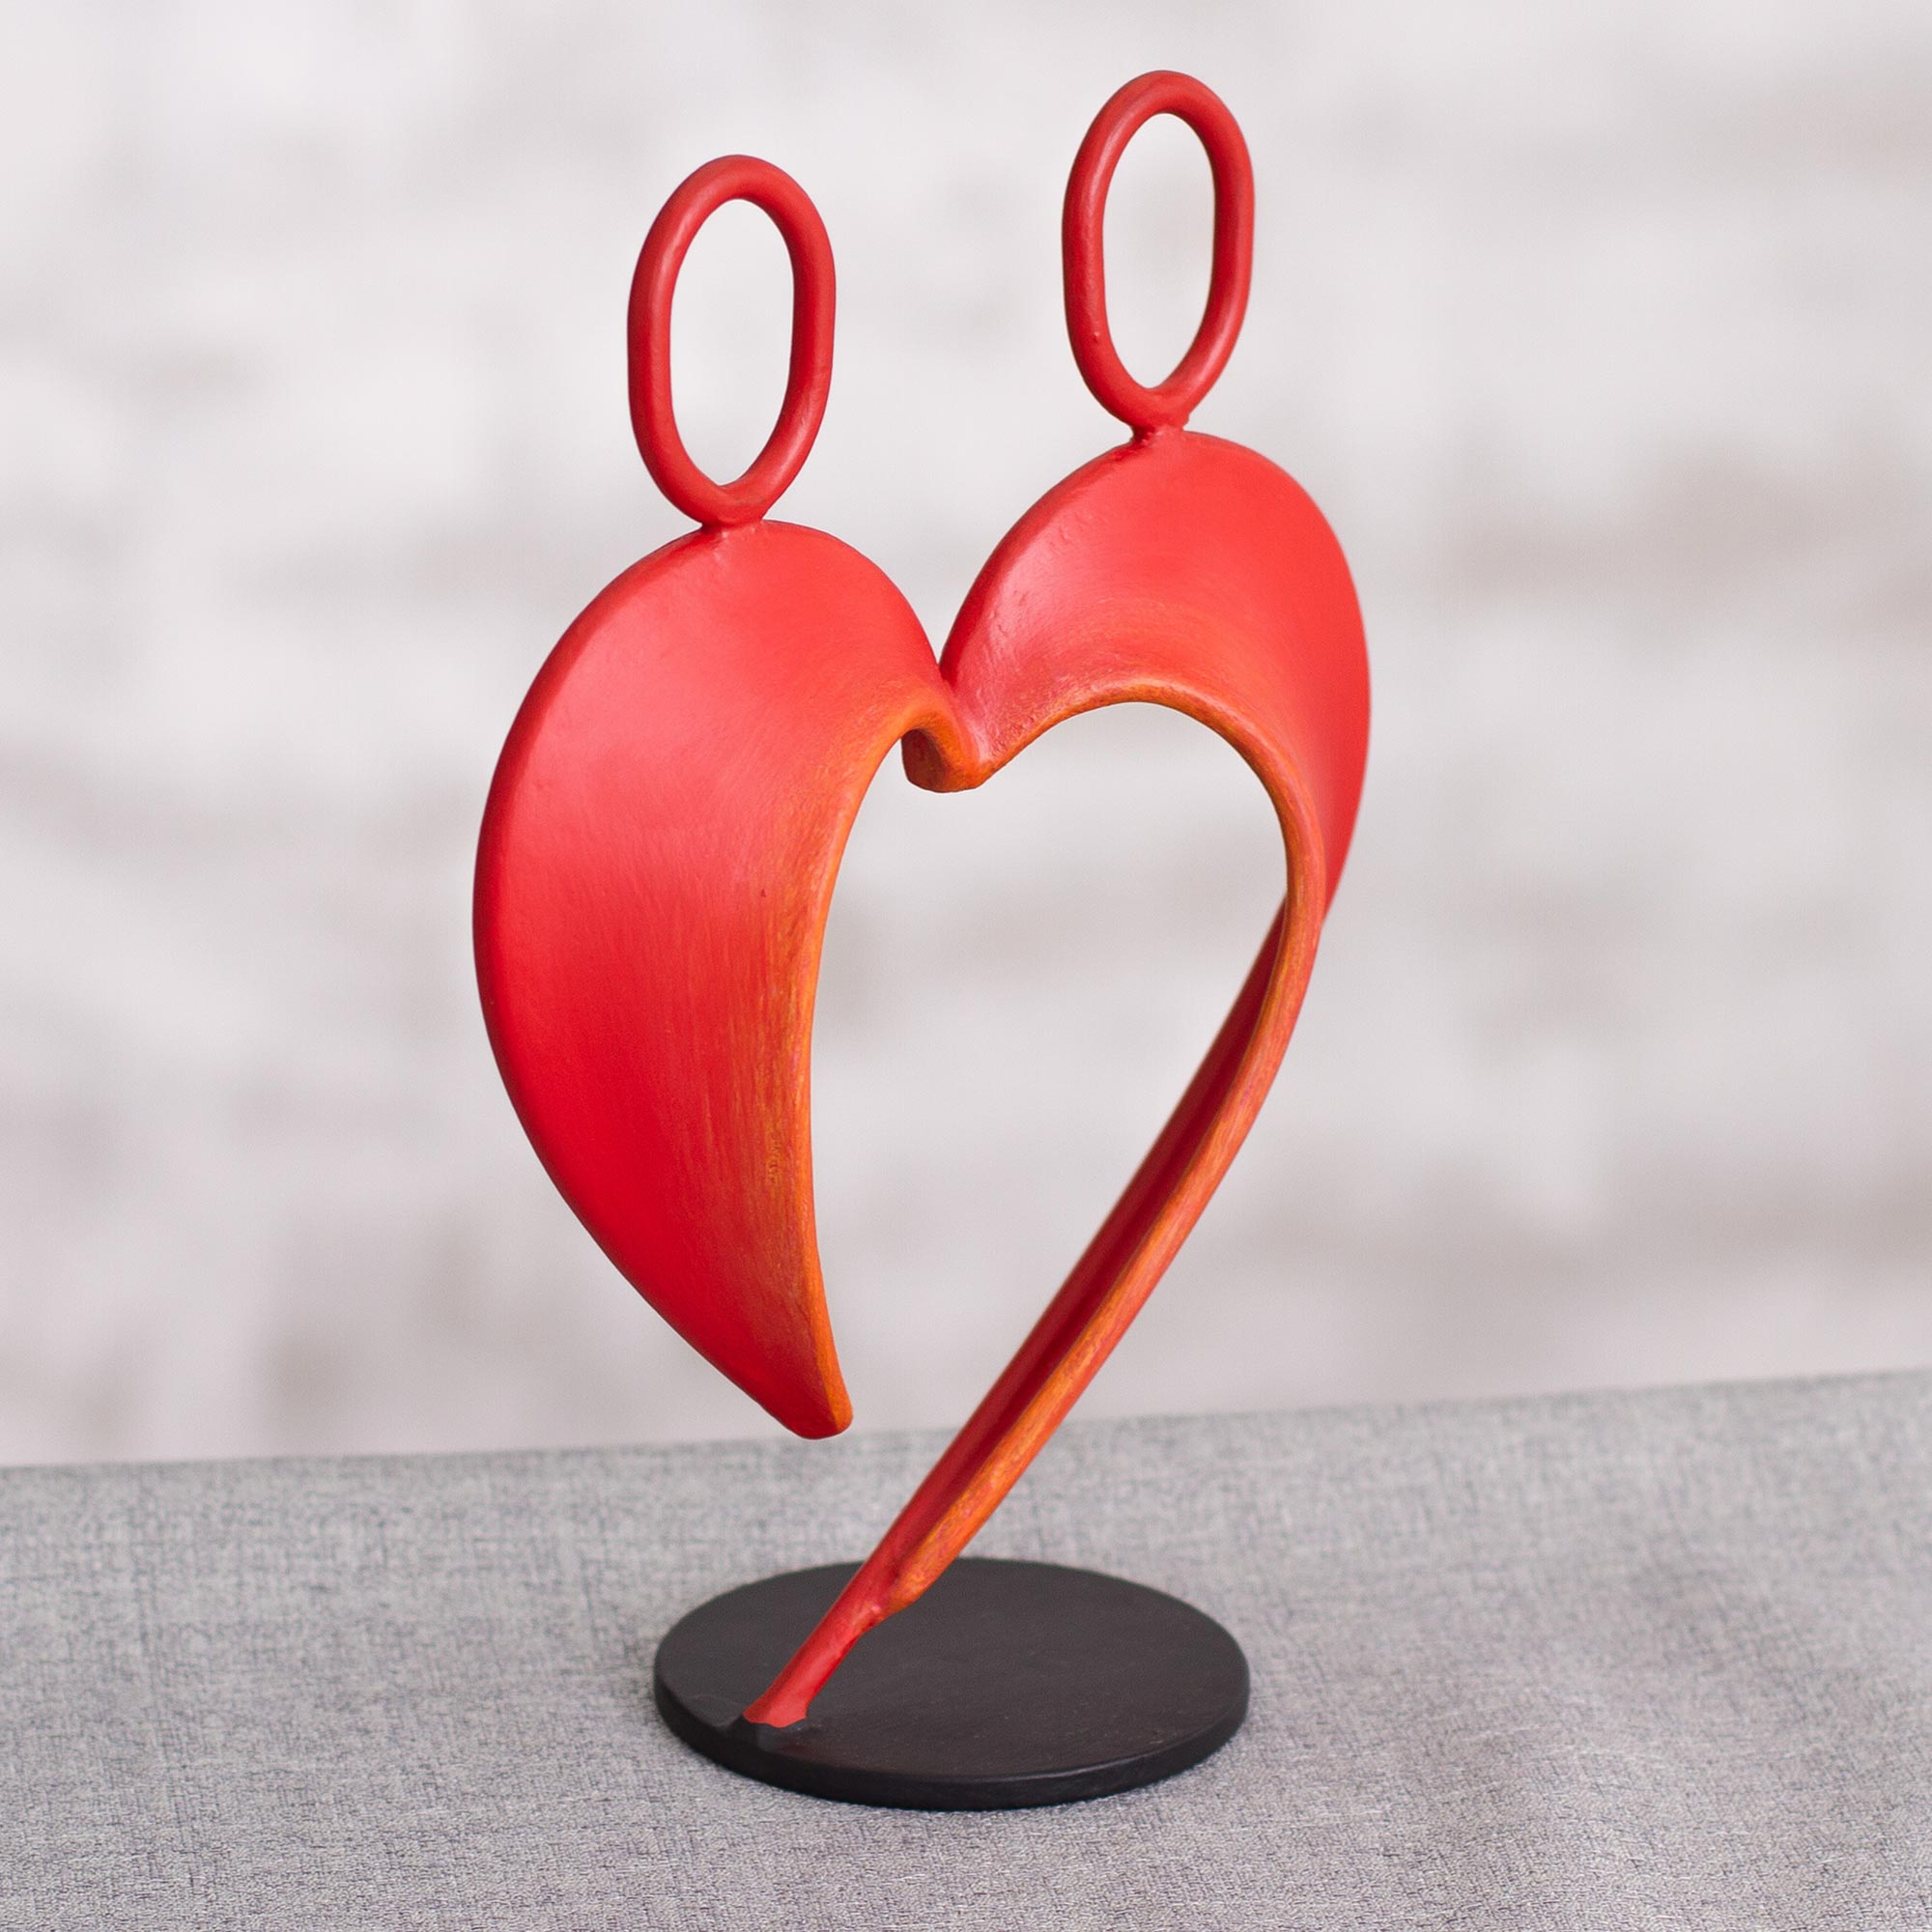 Abstract Steel Heart Sculpture in Red from Peru - Our Heart in Red | NOVICA